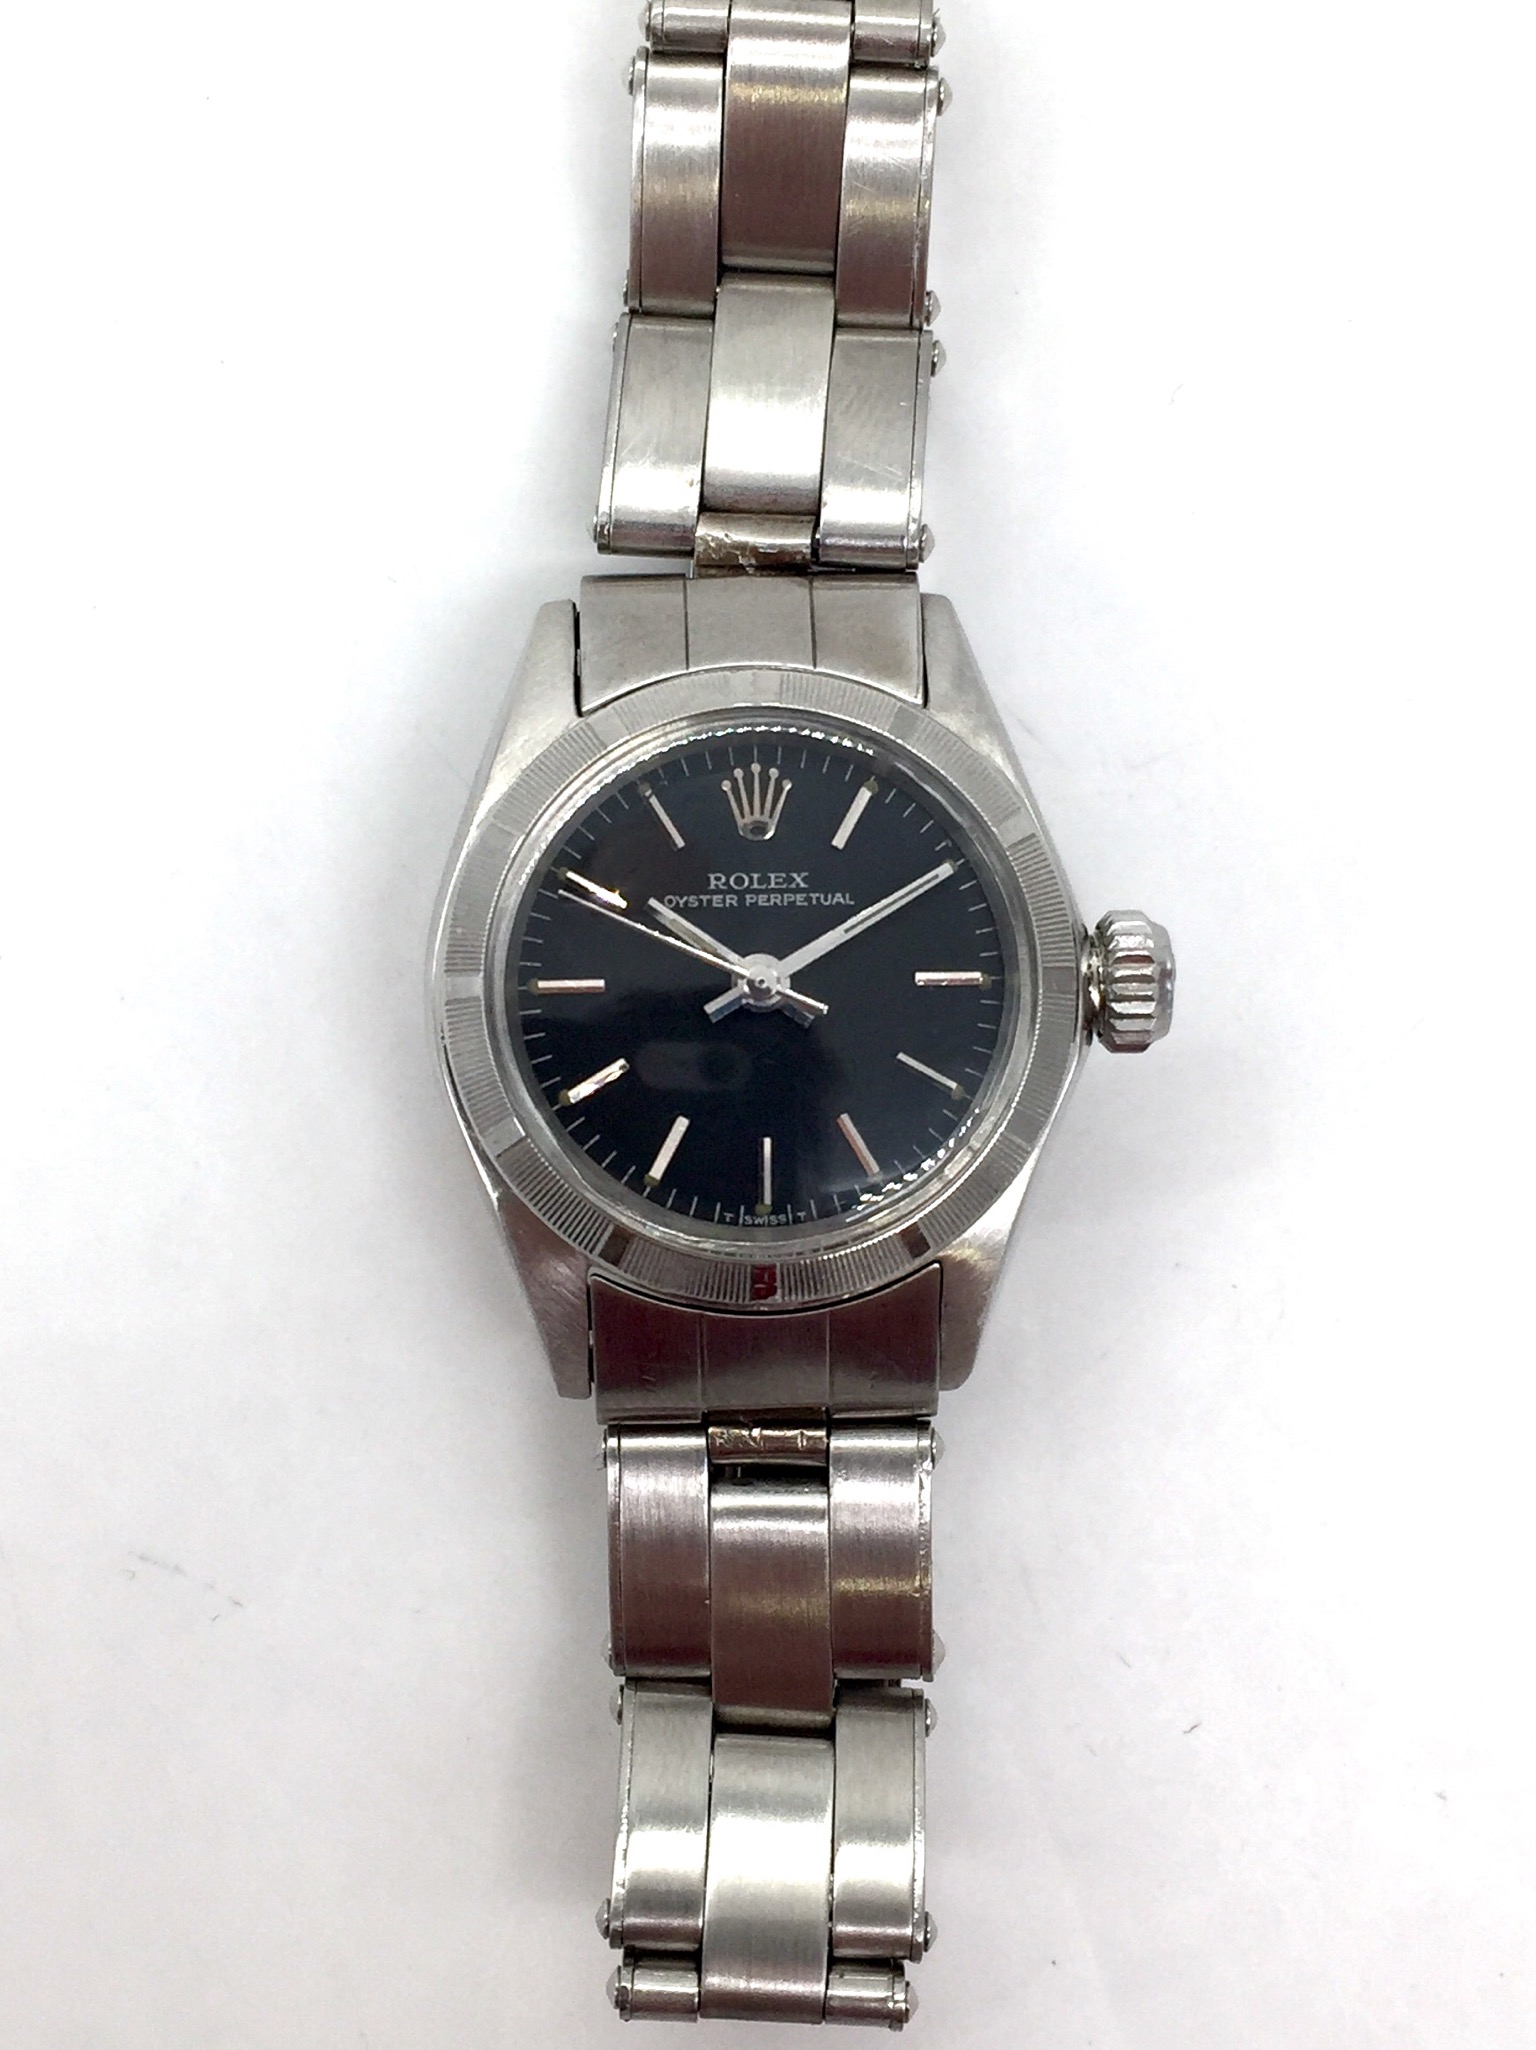 LADY OYSTER PERPETUAL ROLEX